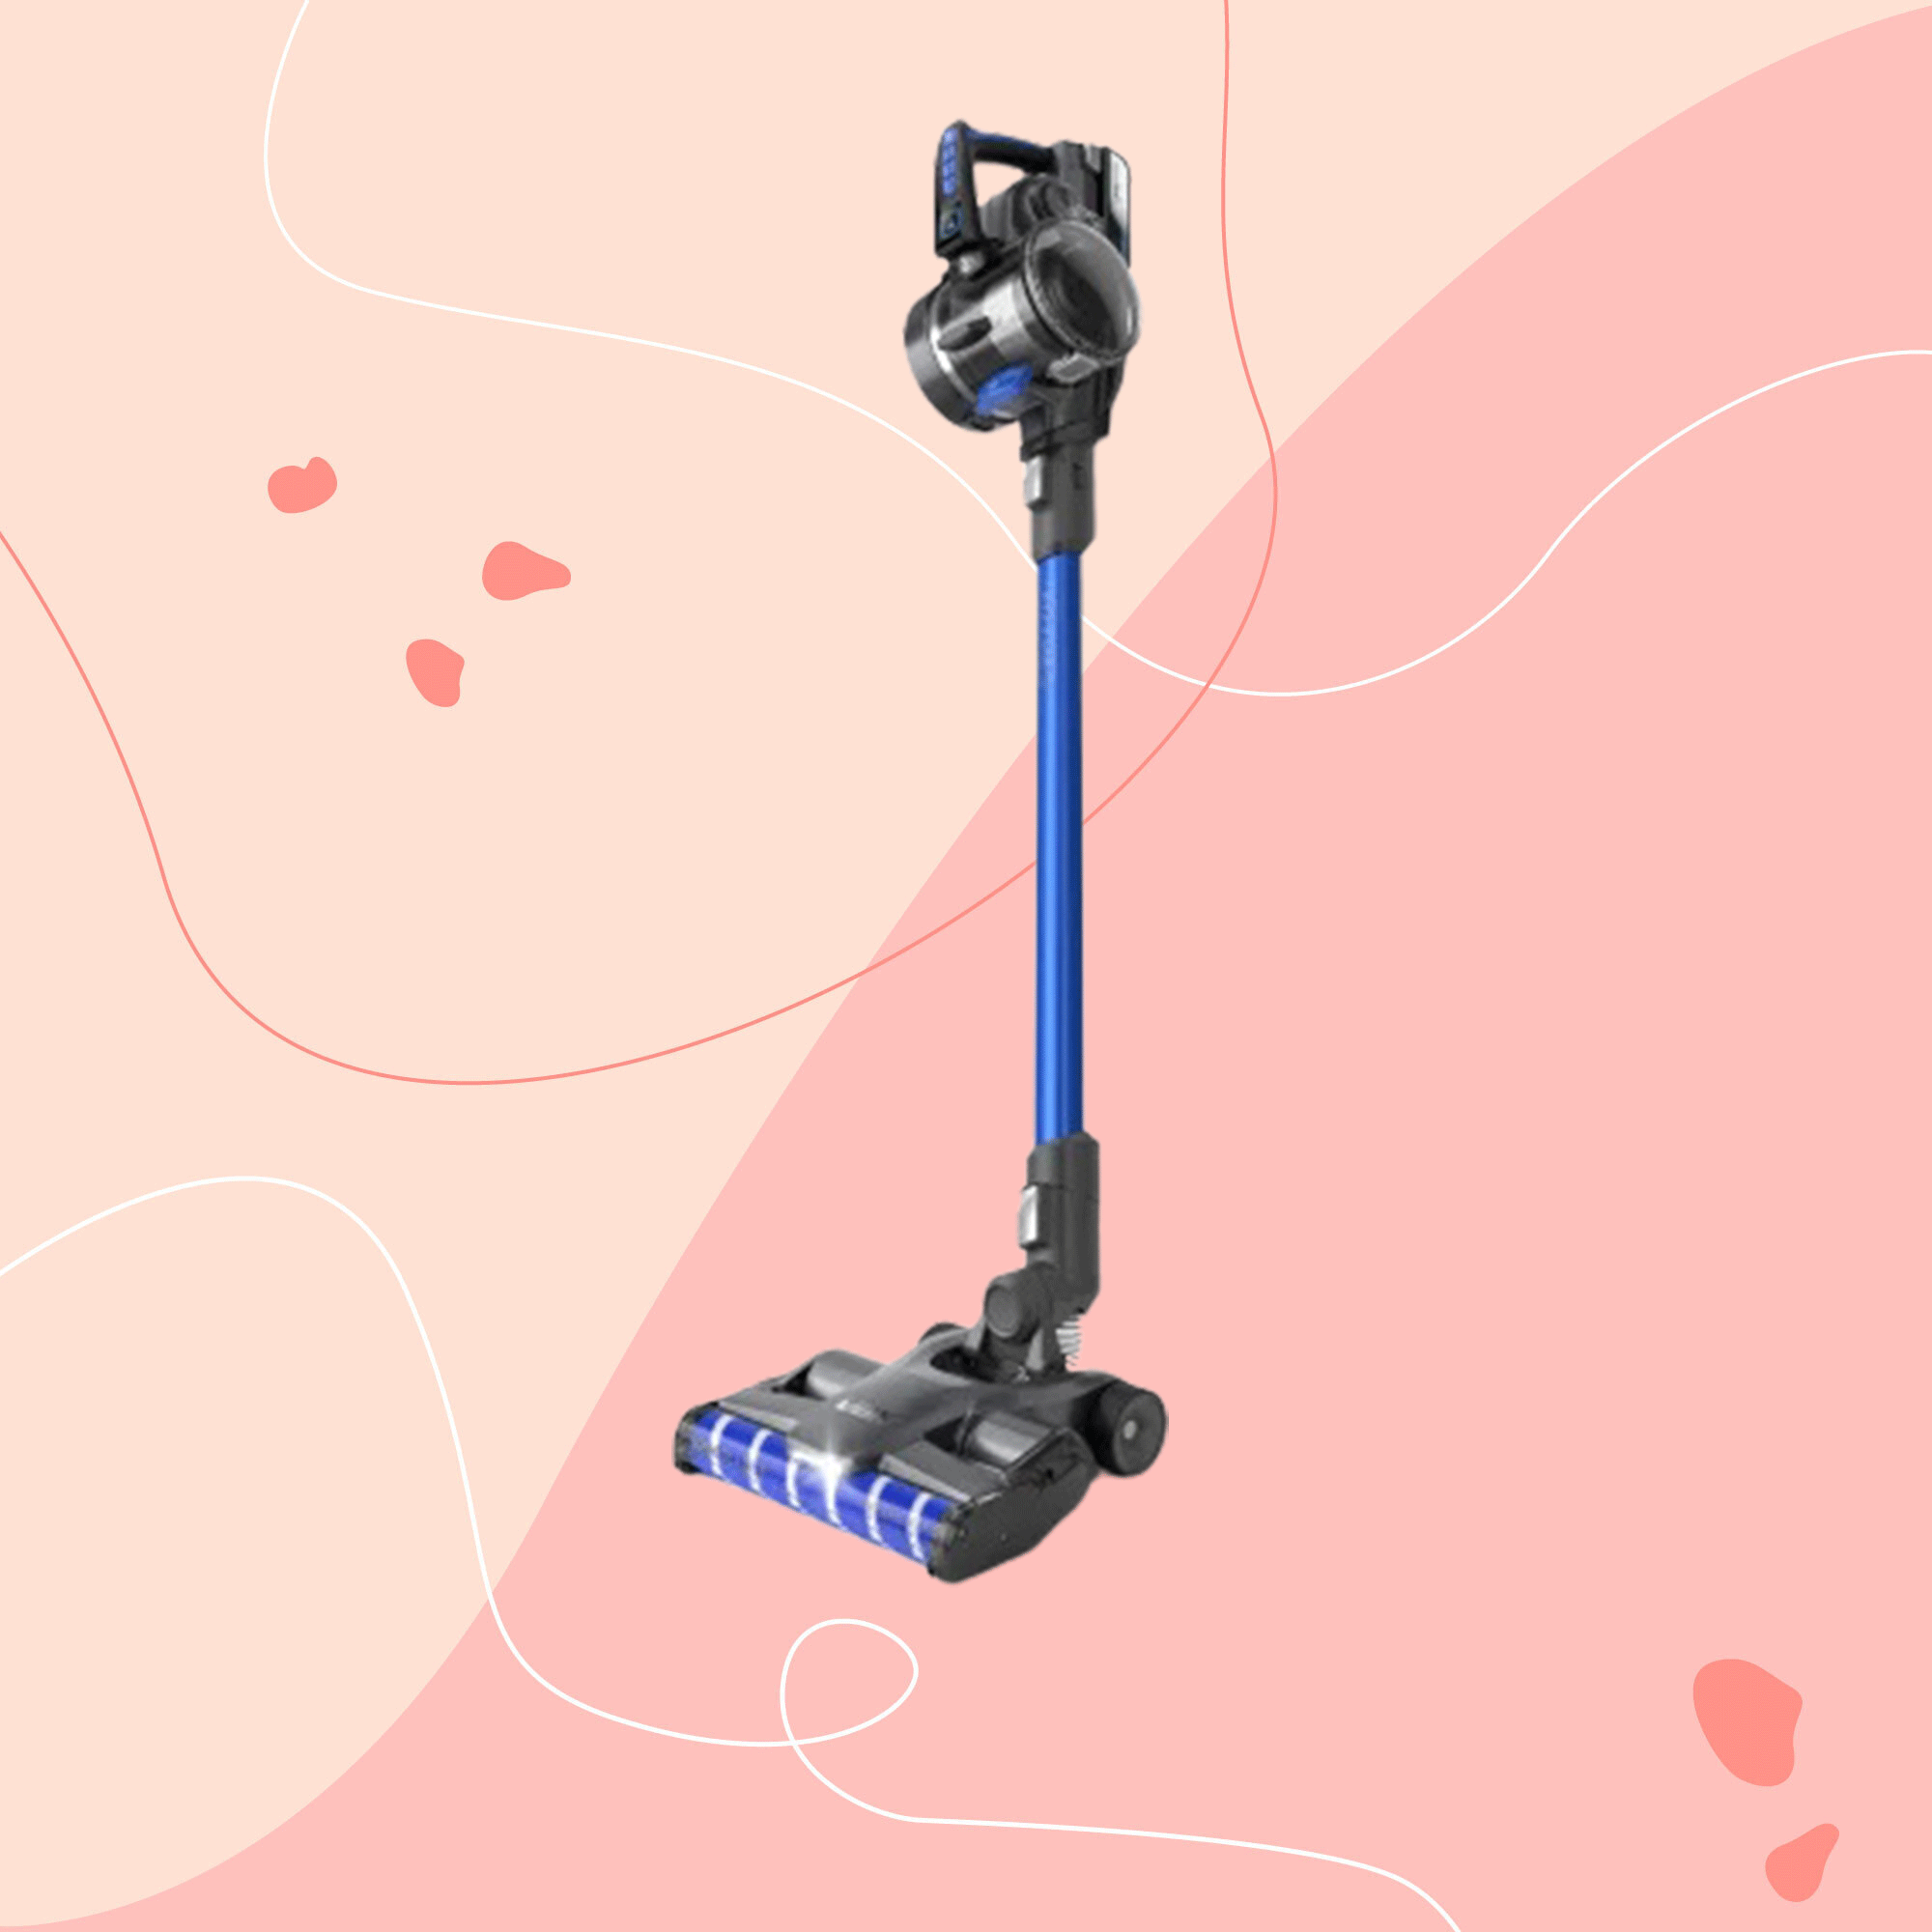 Vacuum cleaner on pink backdrop